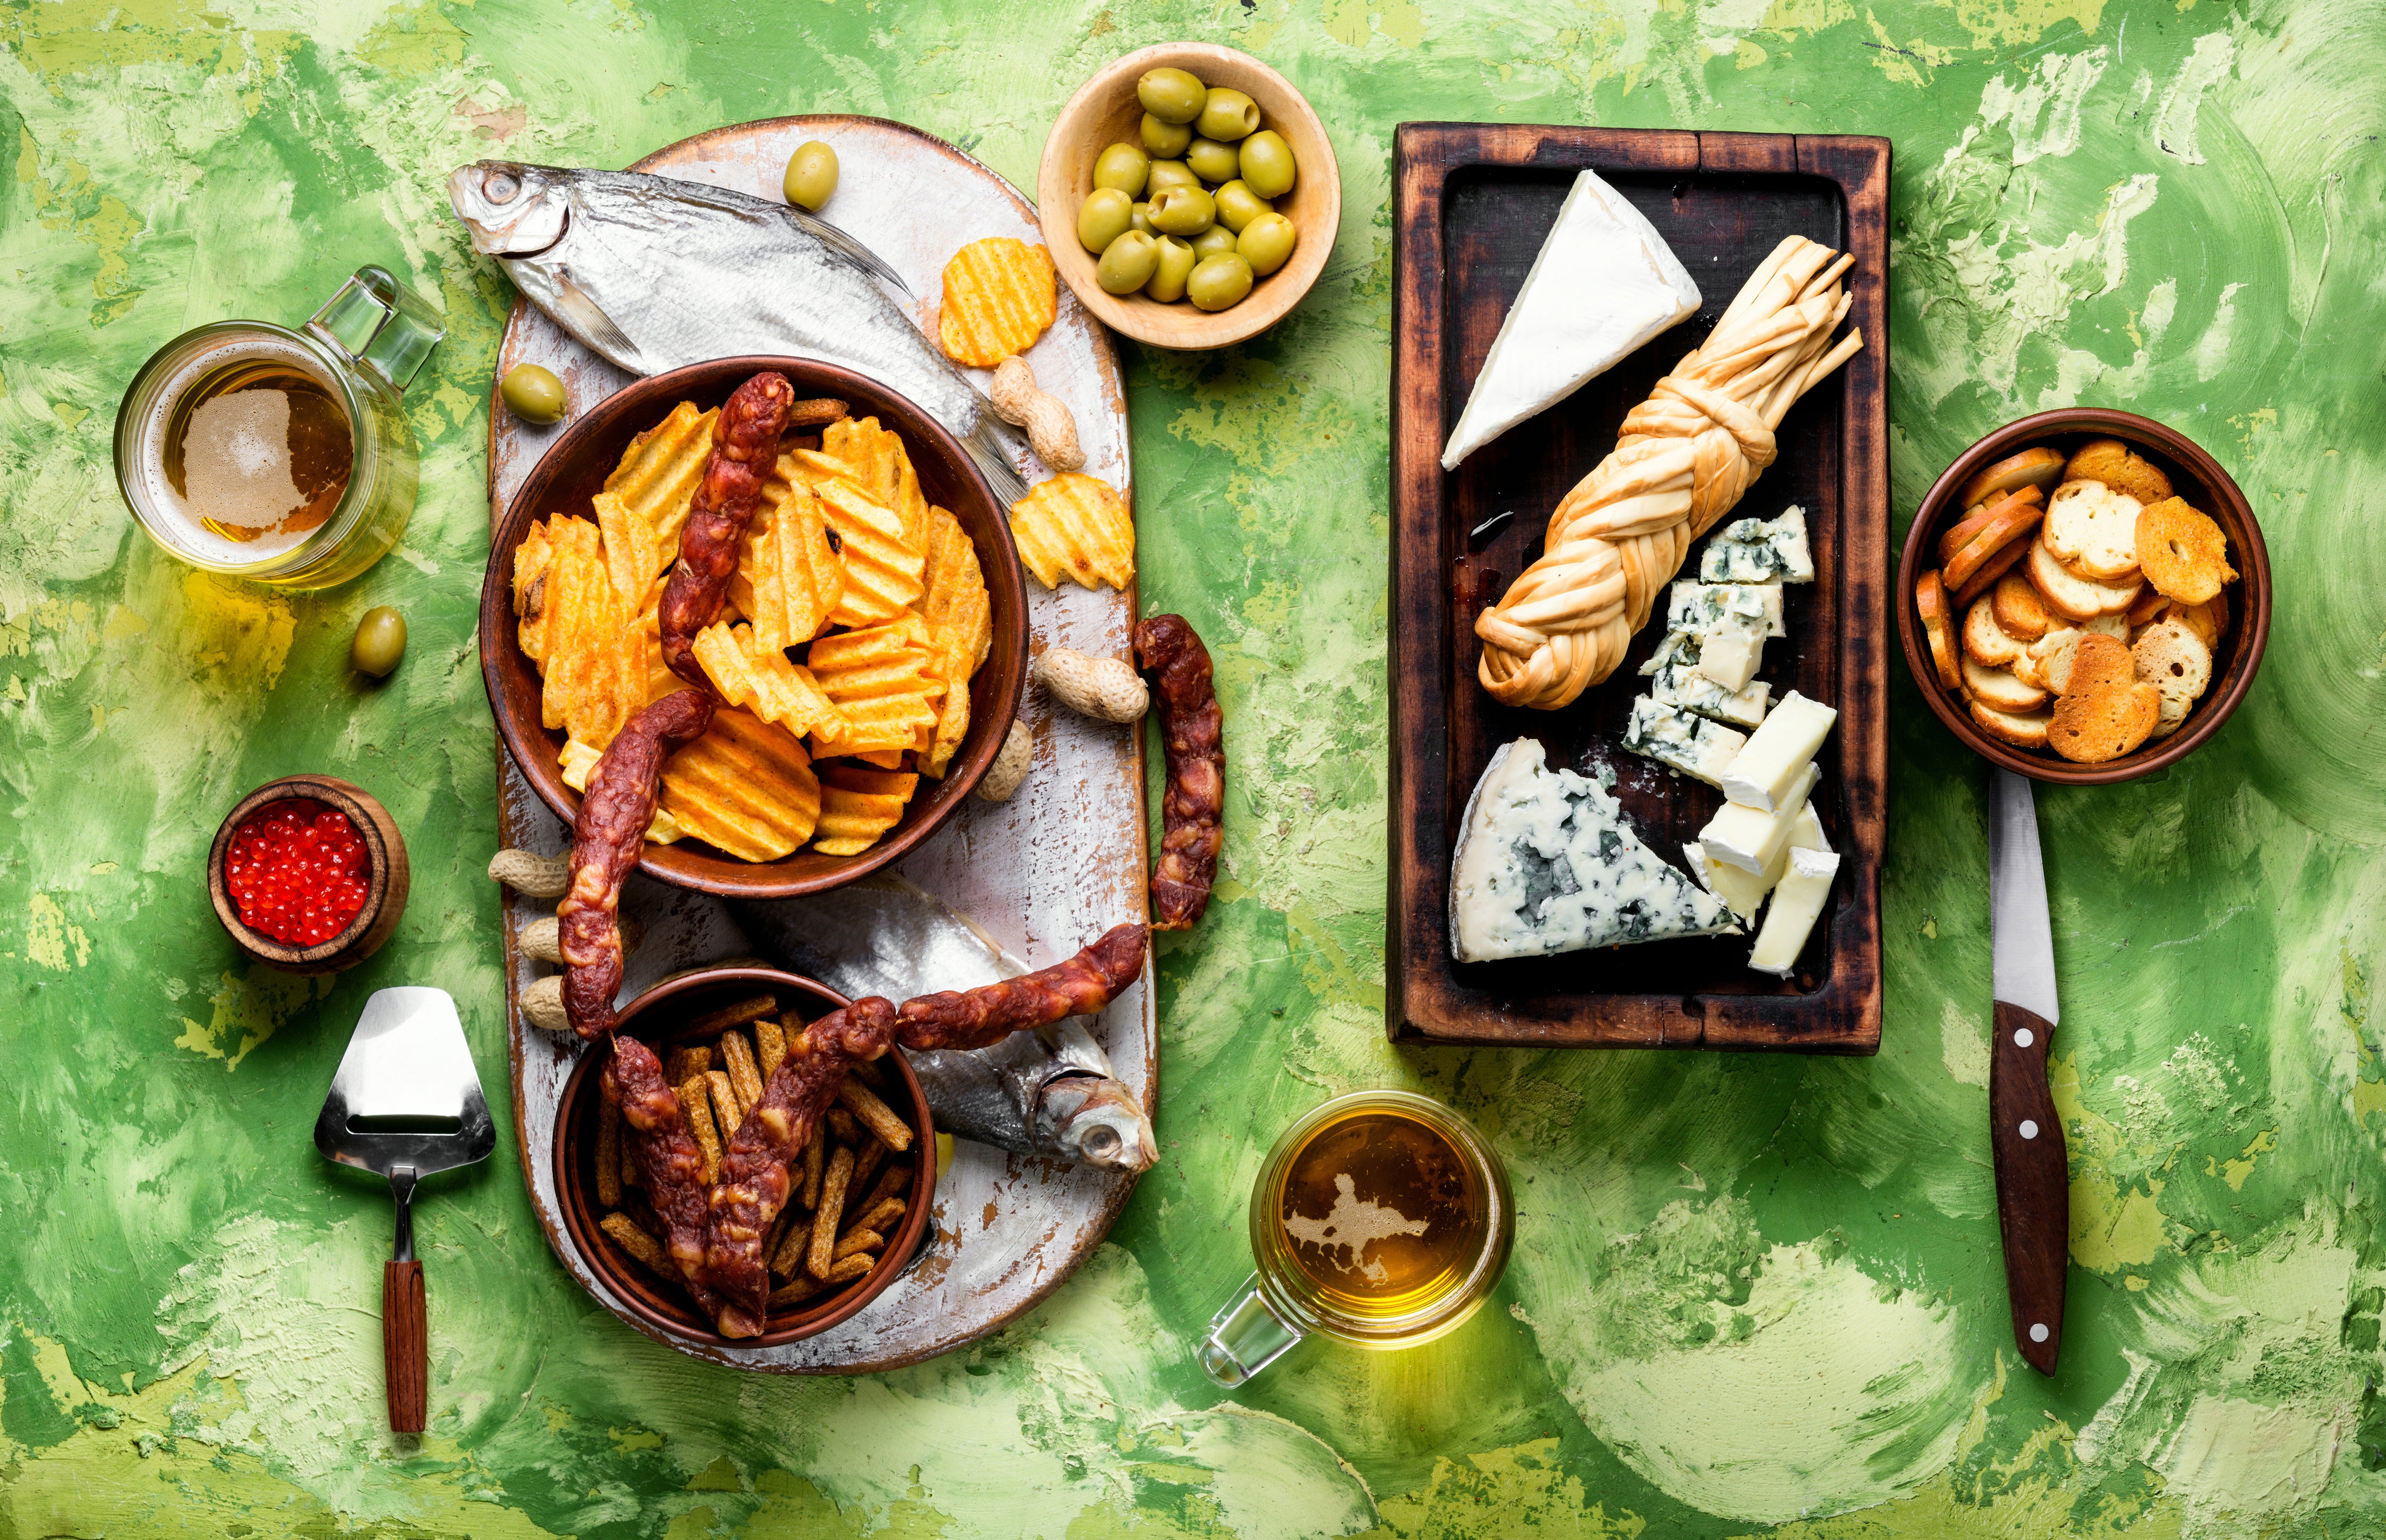 Great Balkan Party Snacks for Hanging Out